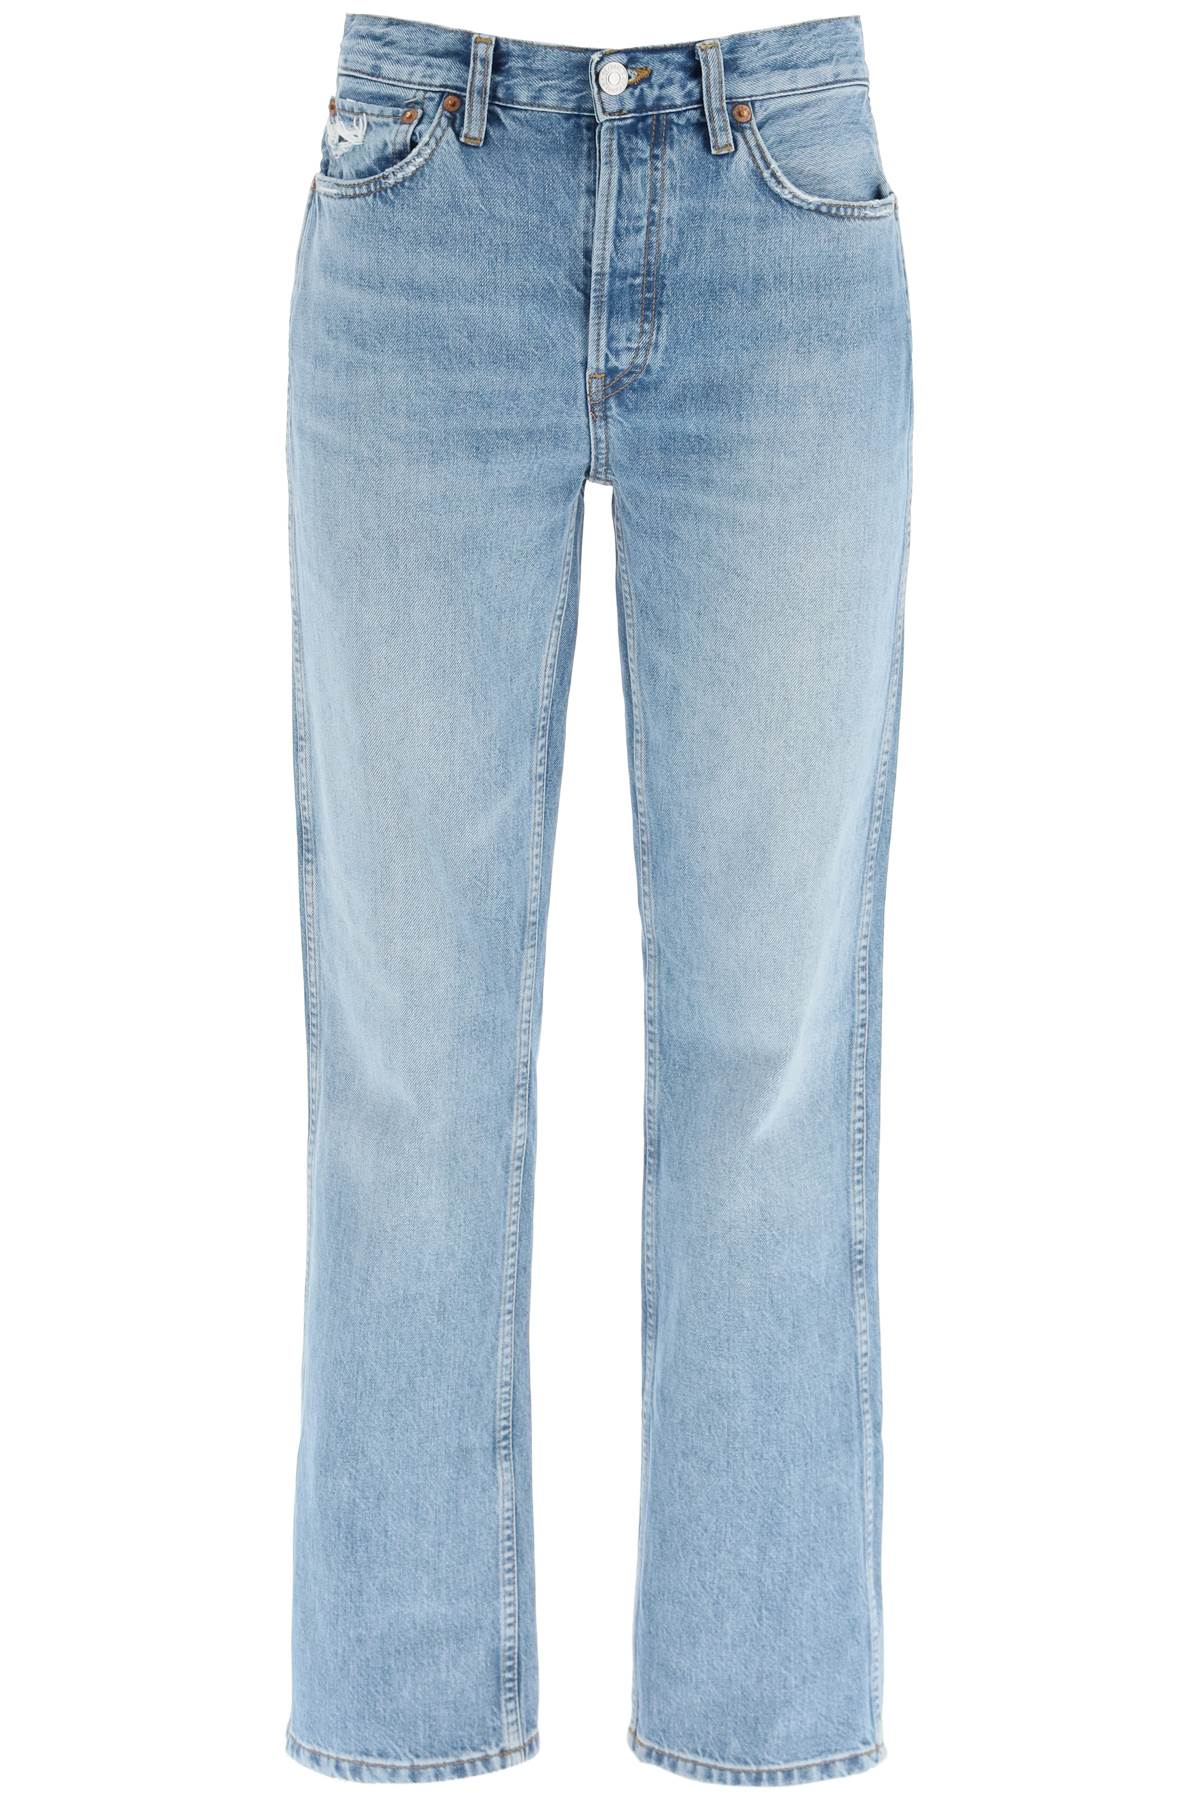 RE/DONE HIGH-WAISTED 90S JEANS